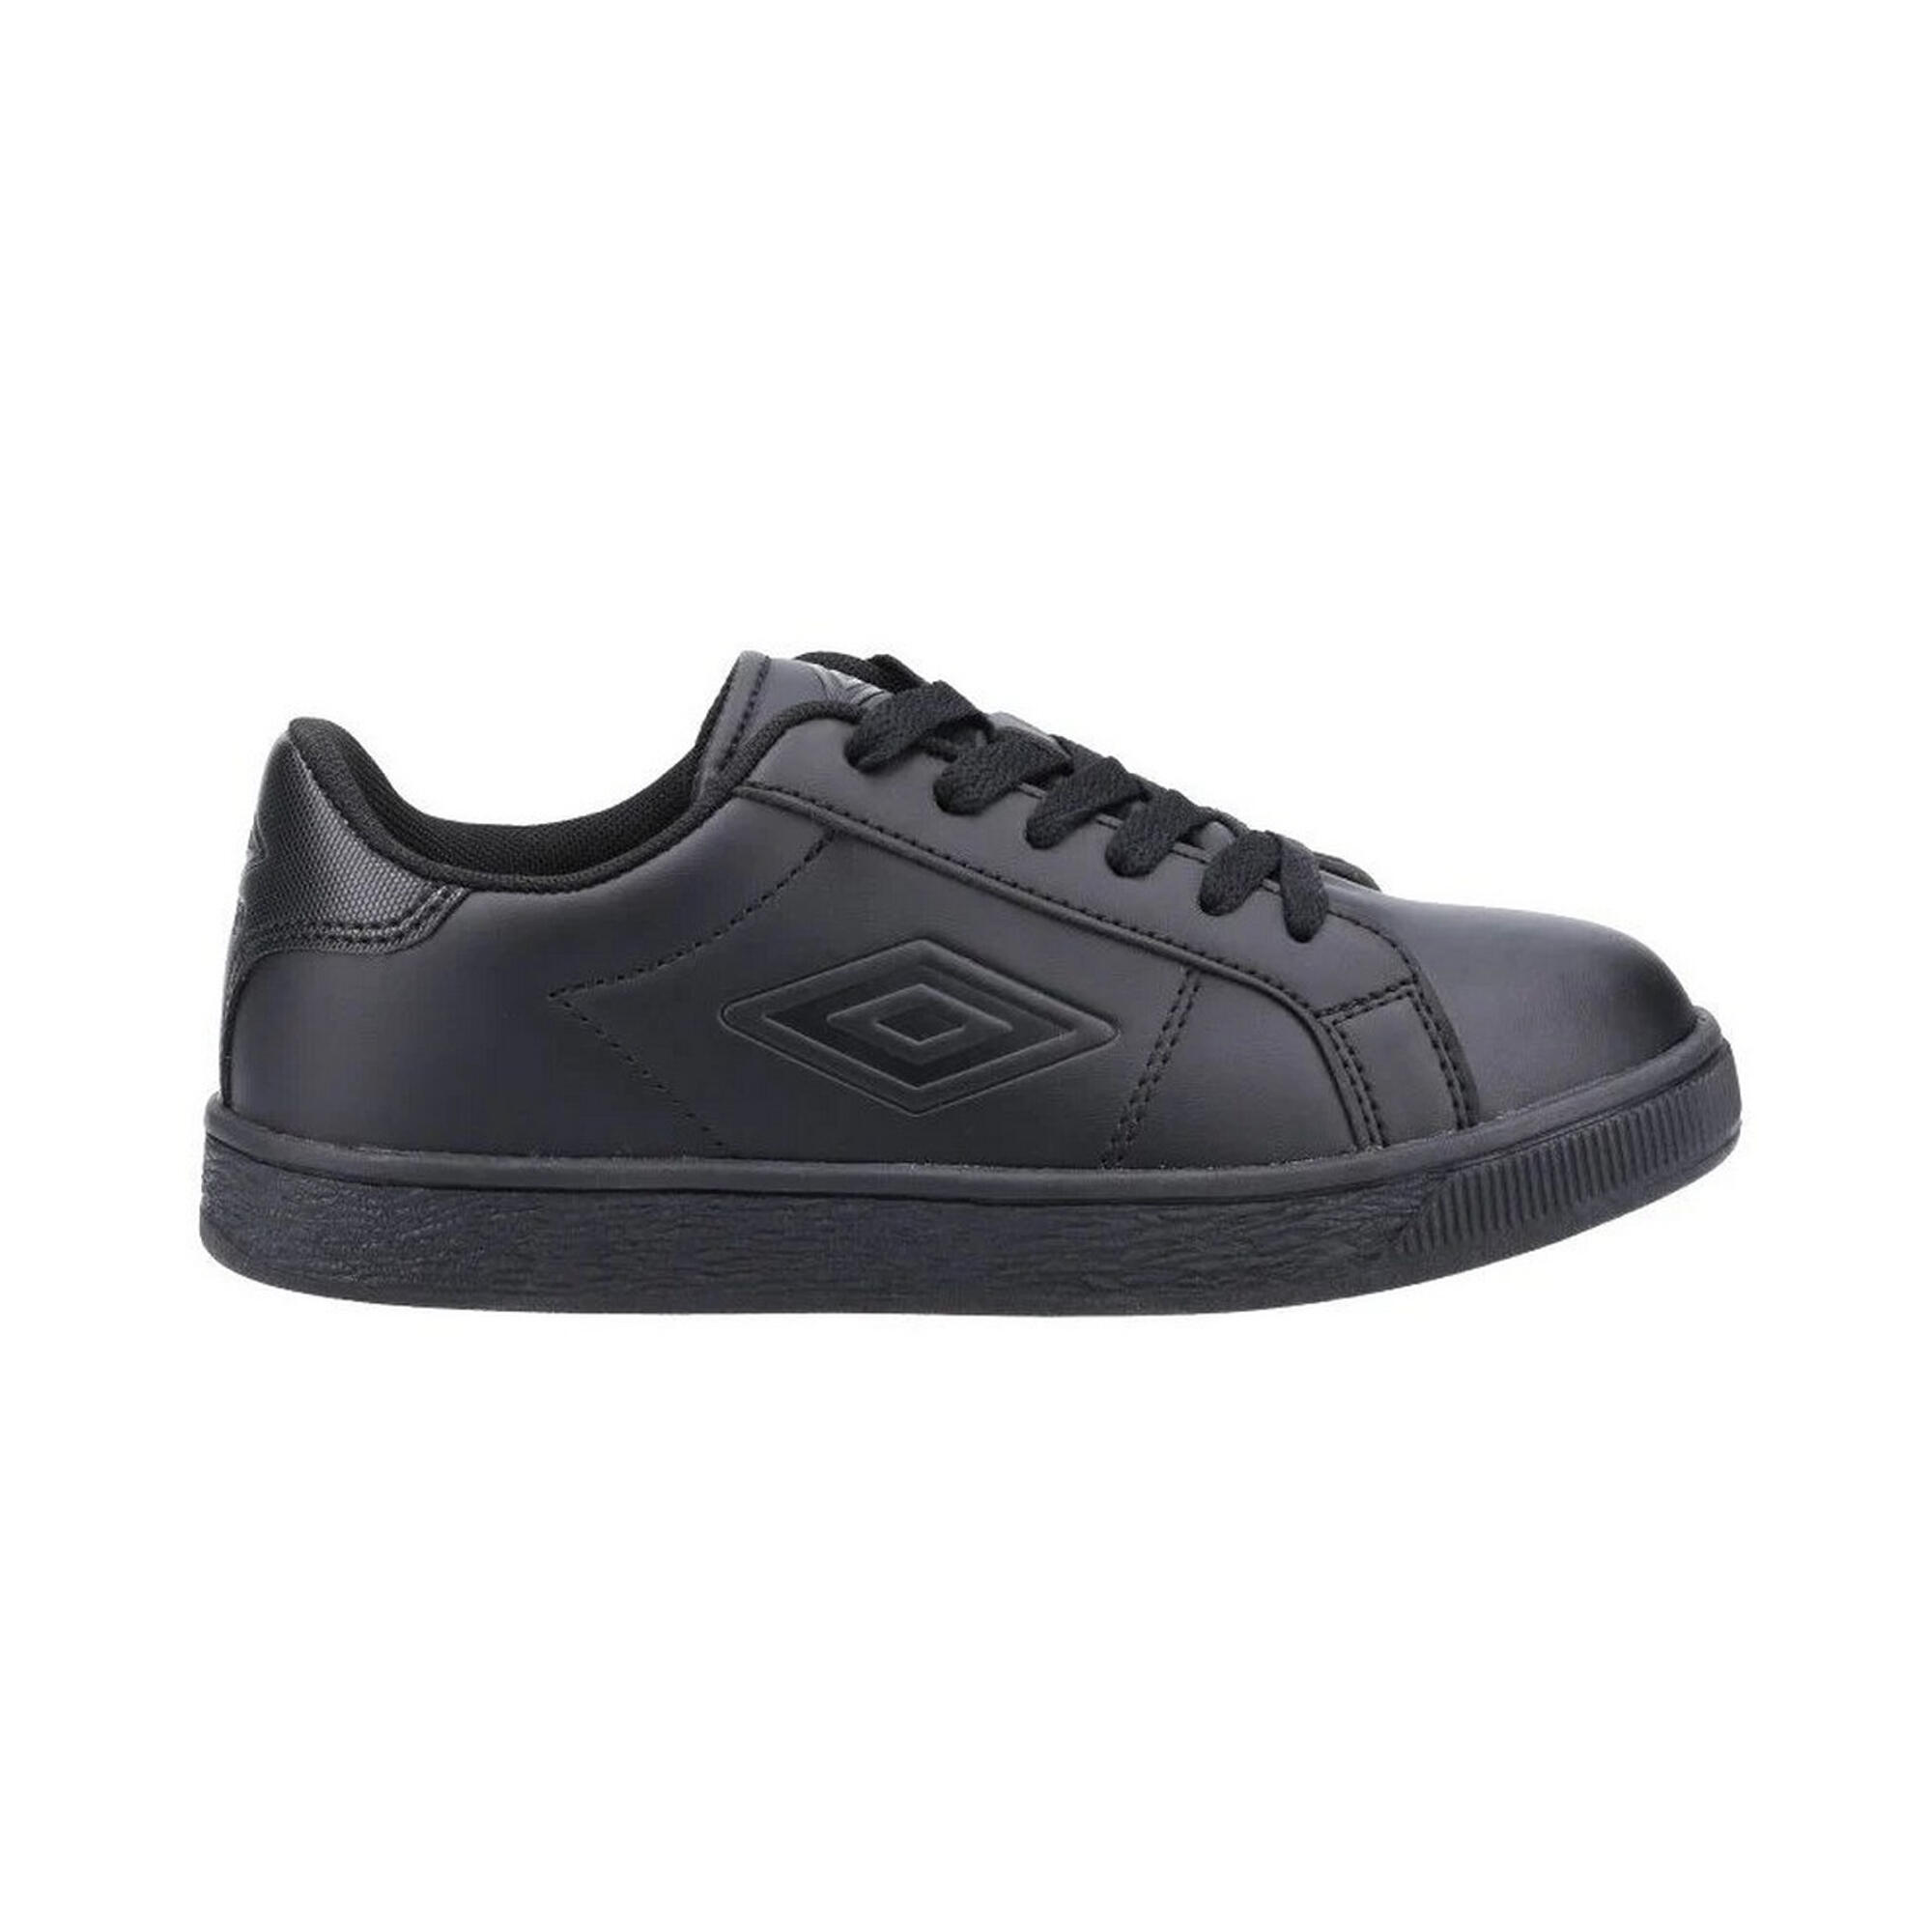 UMBRO Childrens/Kids Medway Lace Trainers (Black)